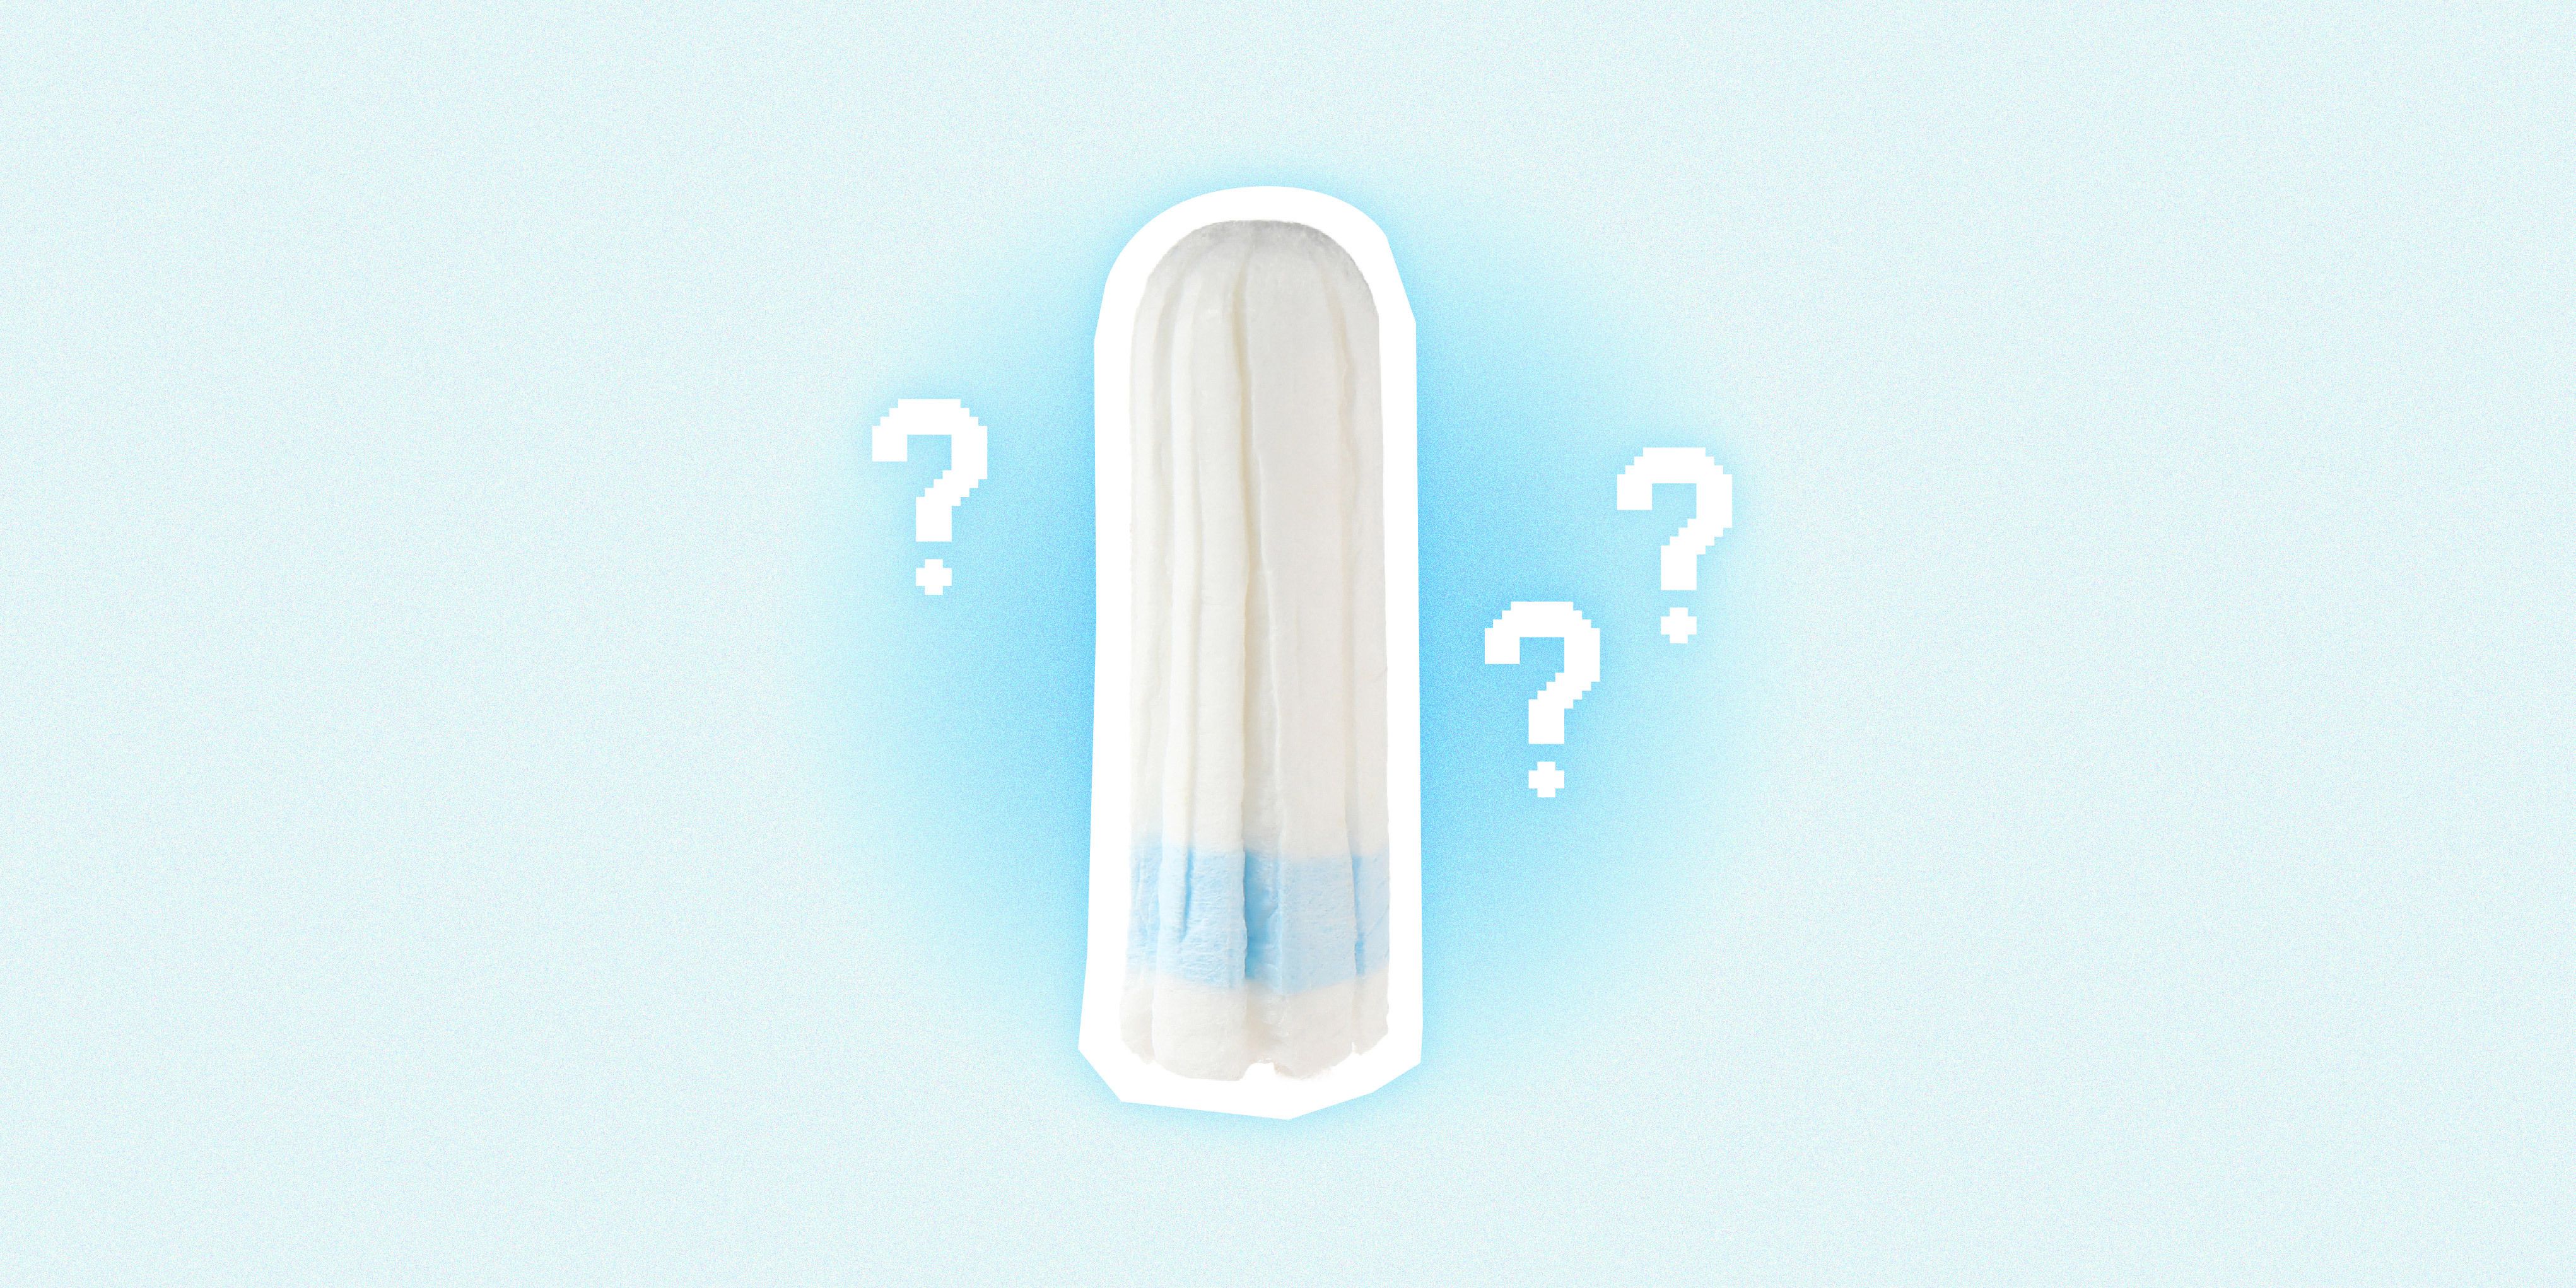 What Happens If You Have Sex with a Tampon In?